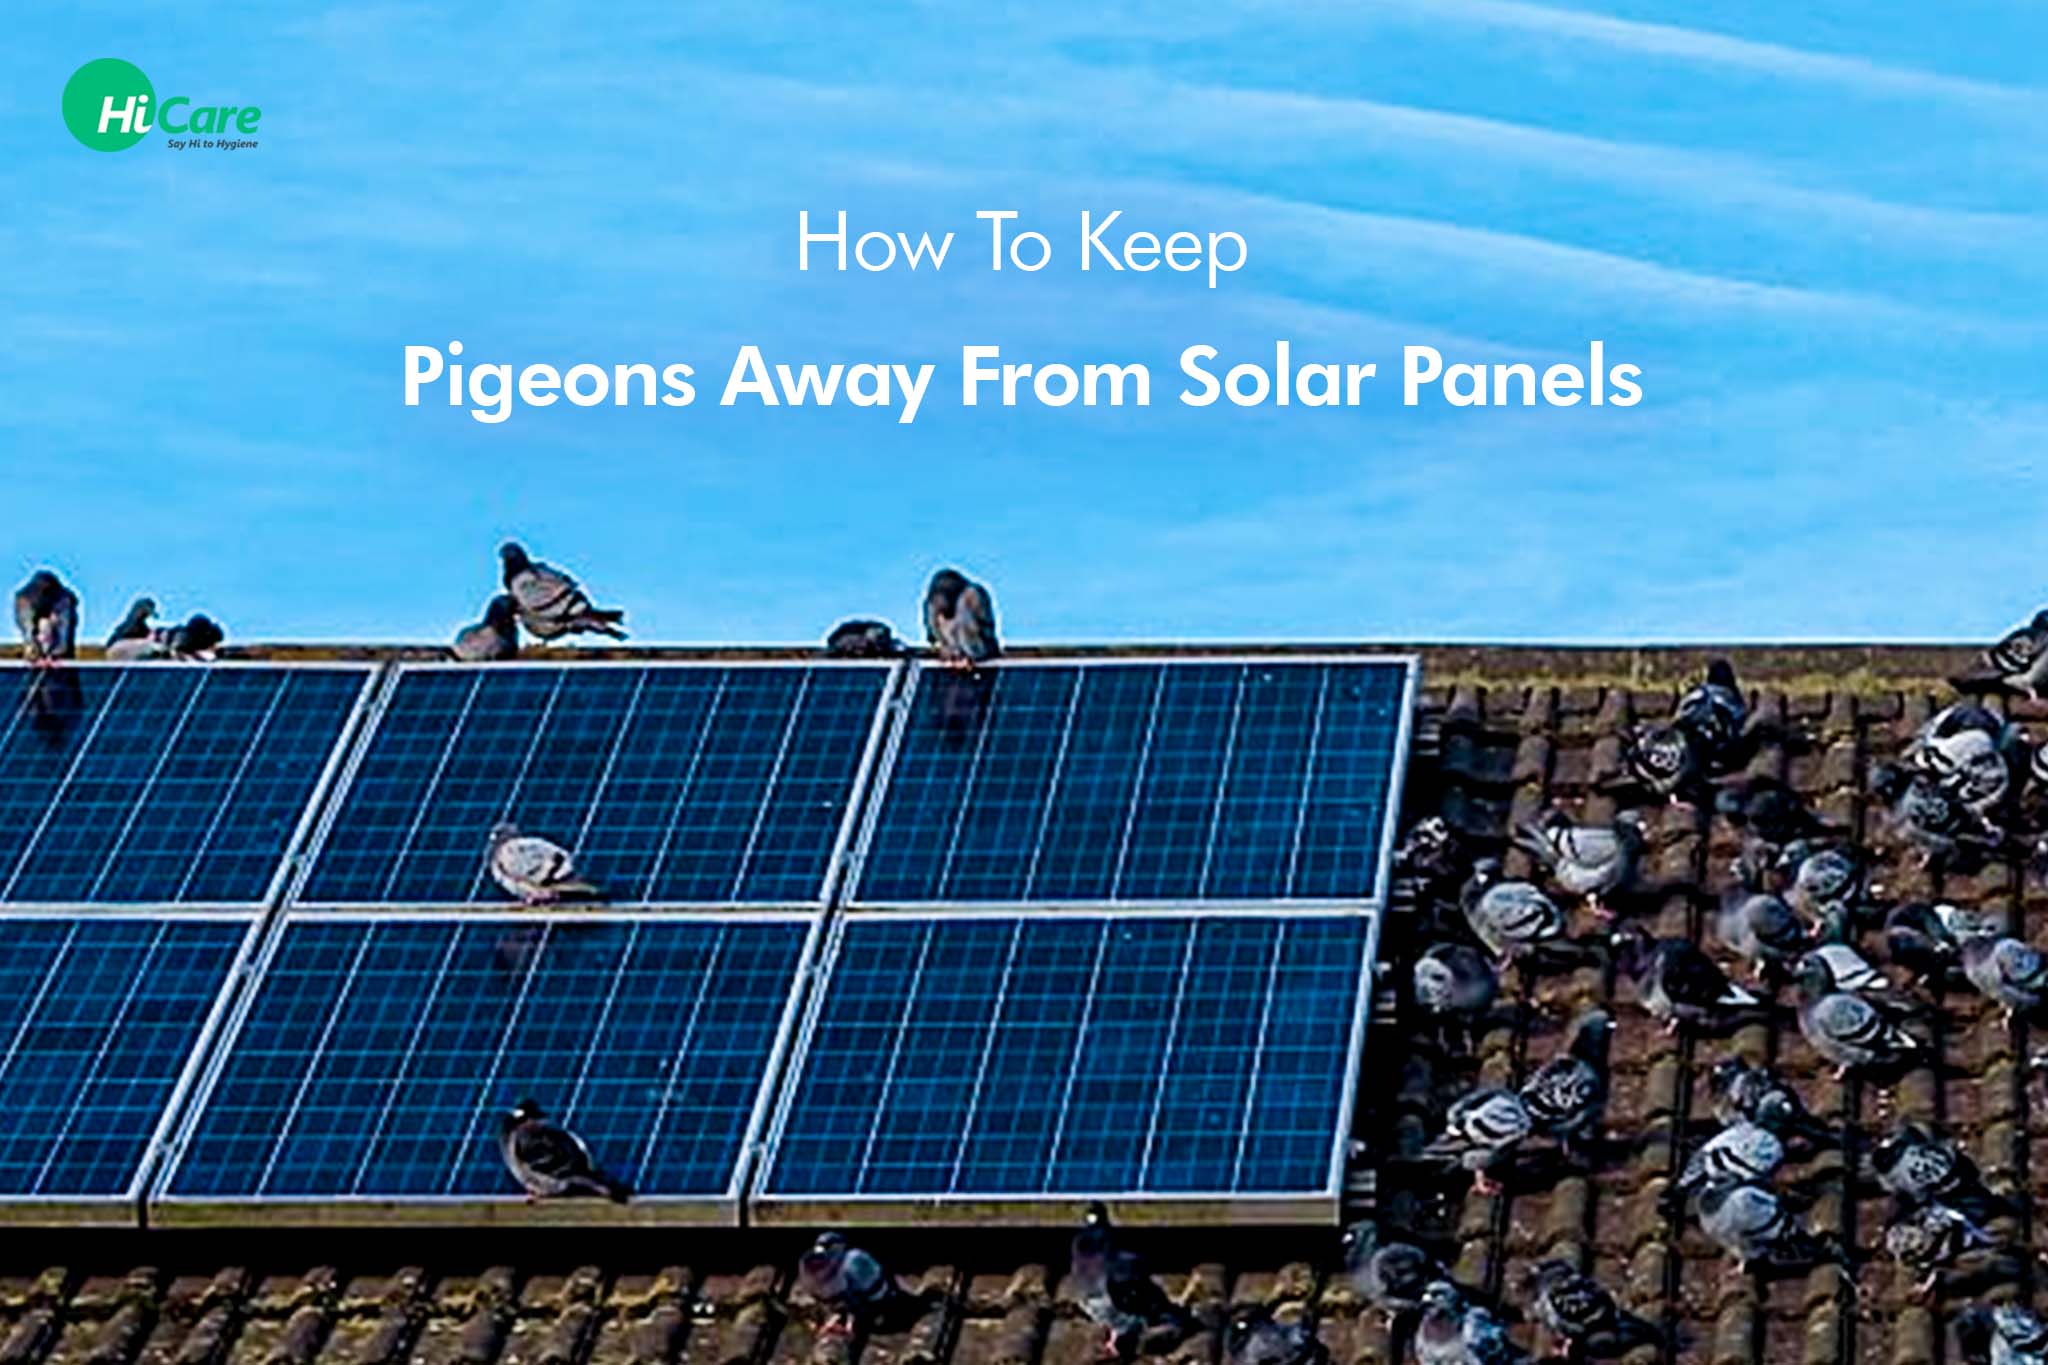 4 Important Tips To Keep Pigeons Away From Solar Panels | HiCare